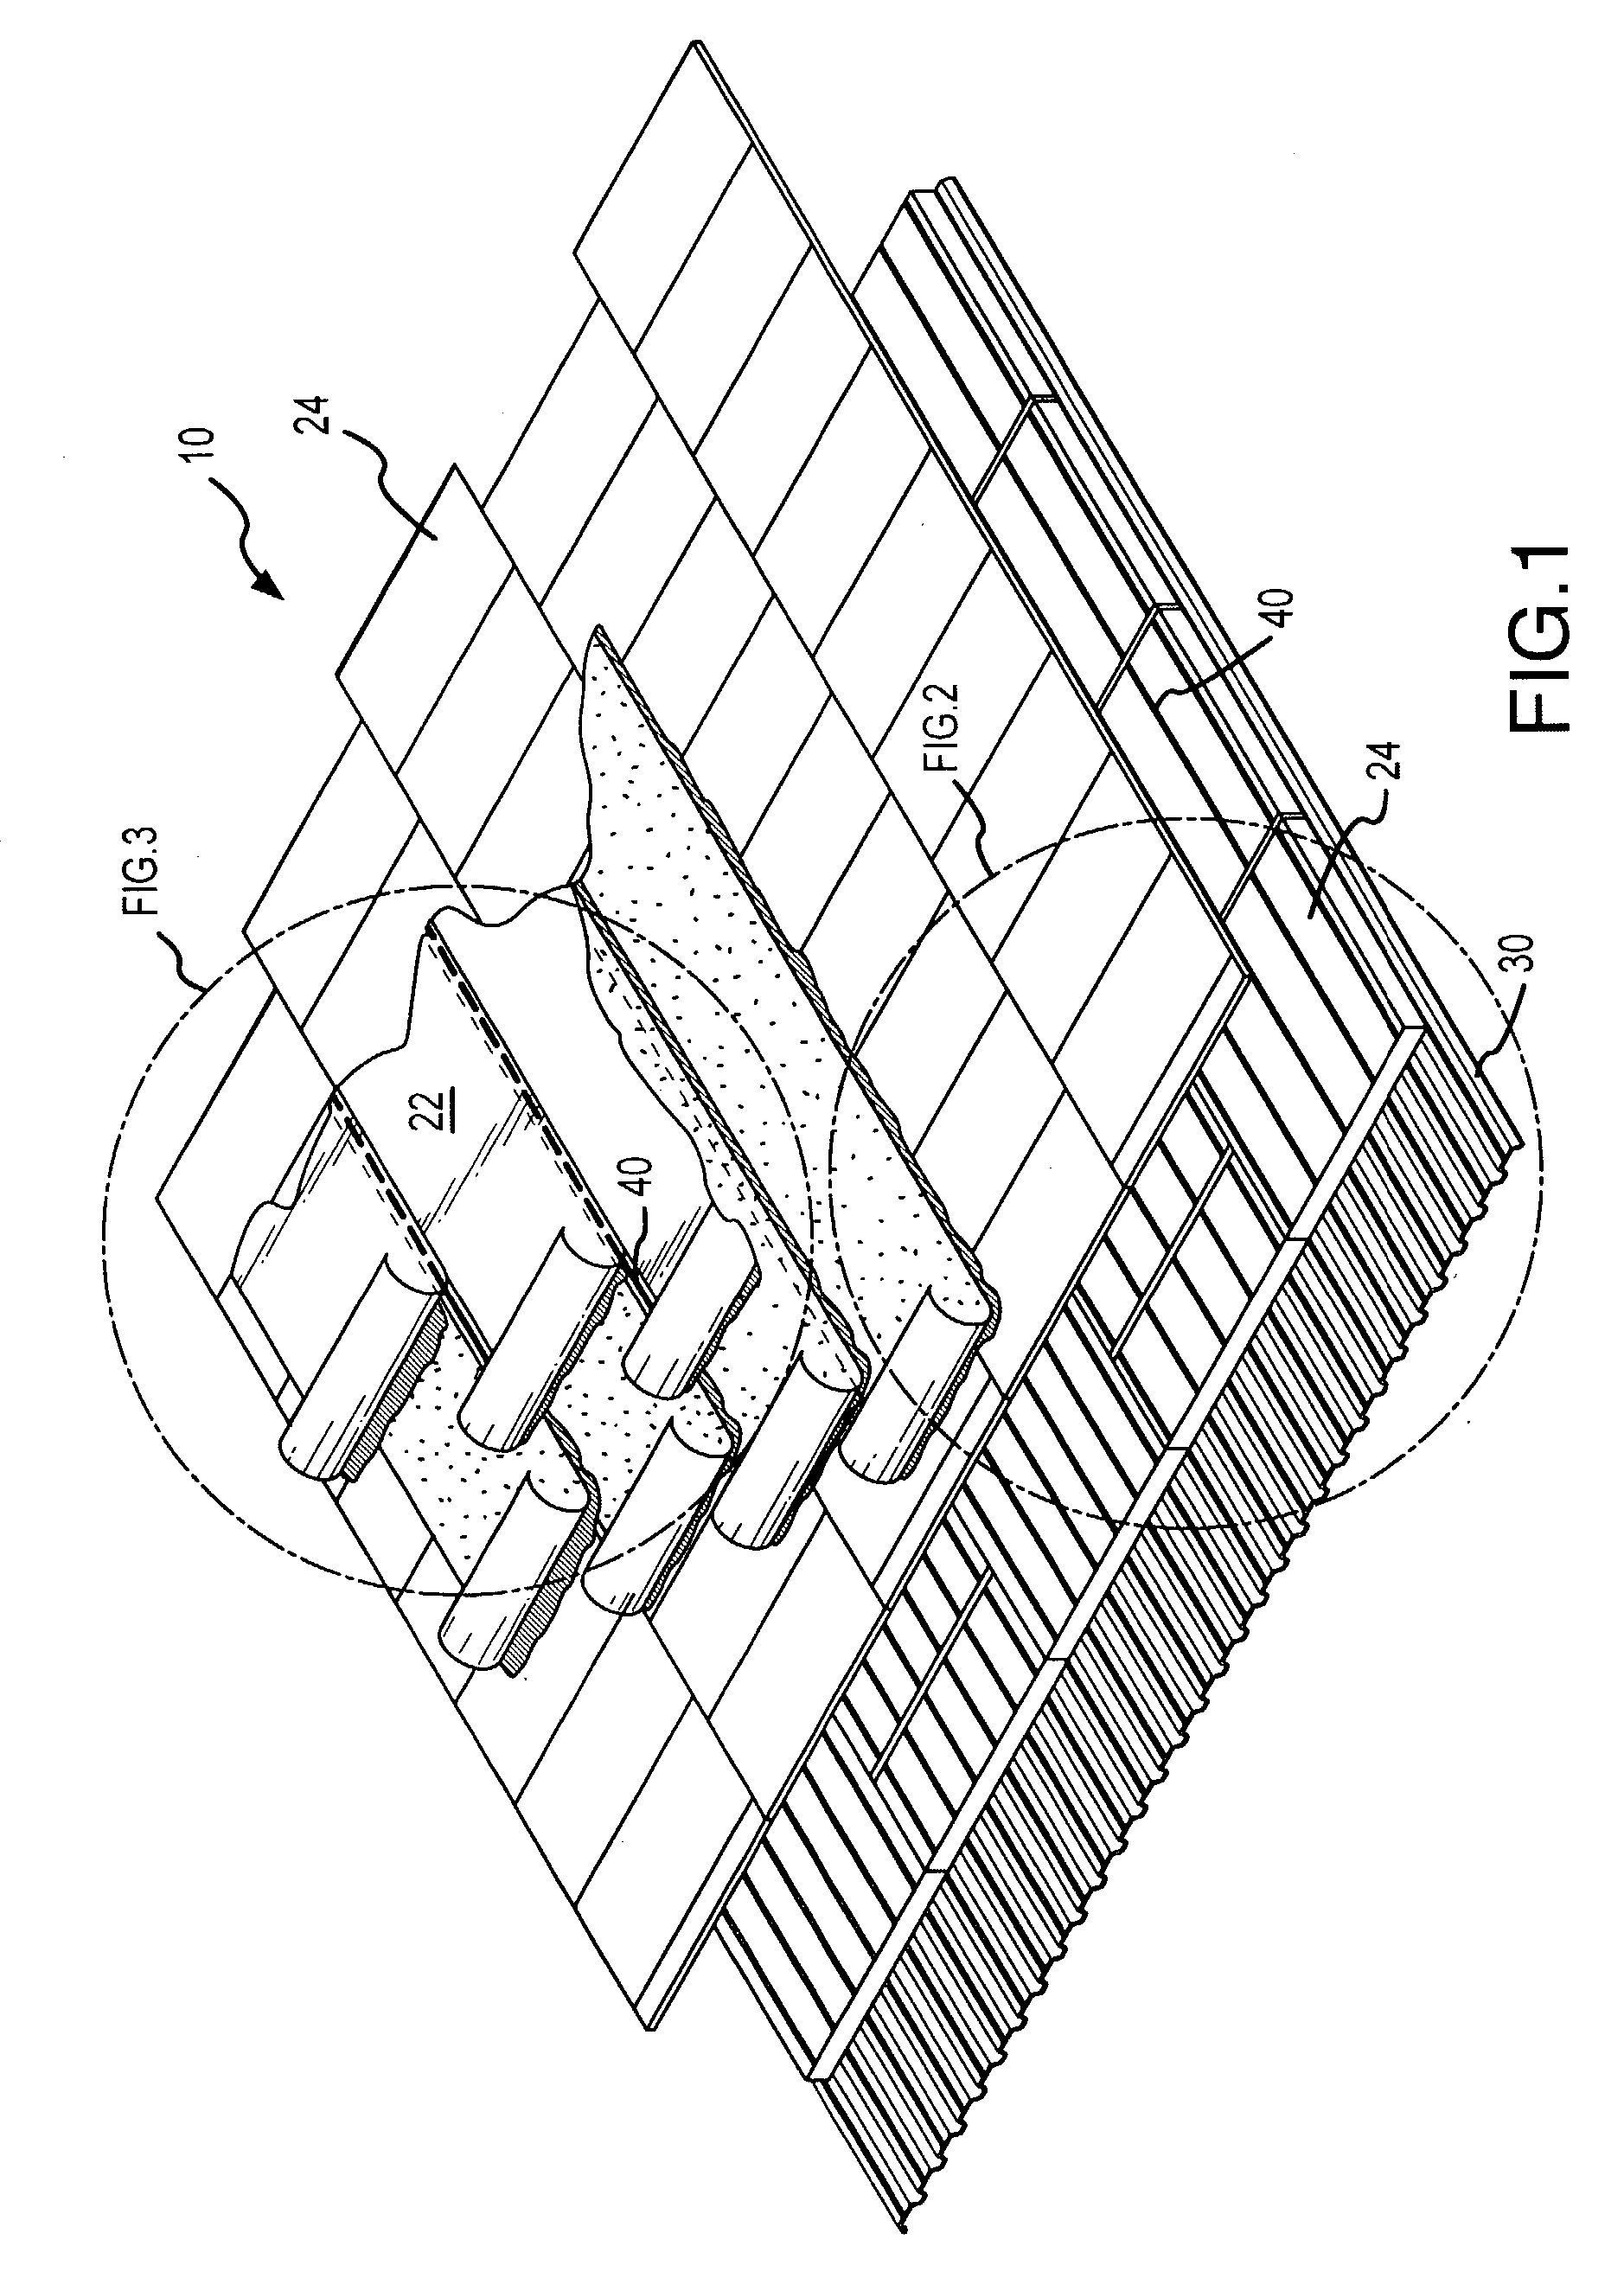 Composition and method for roofing material installation